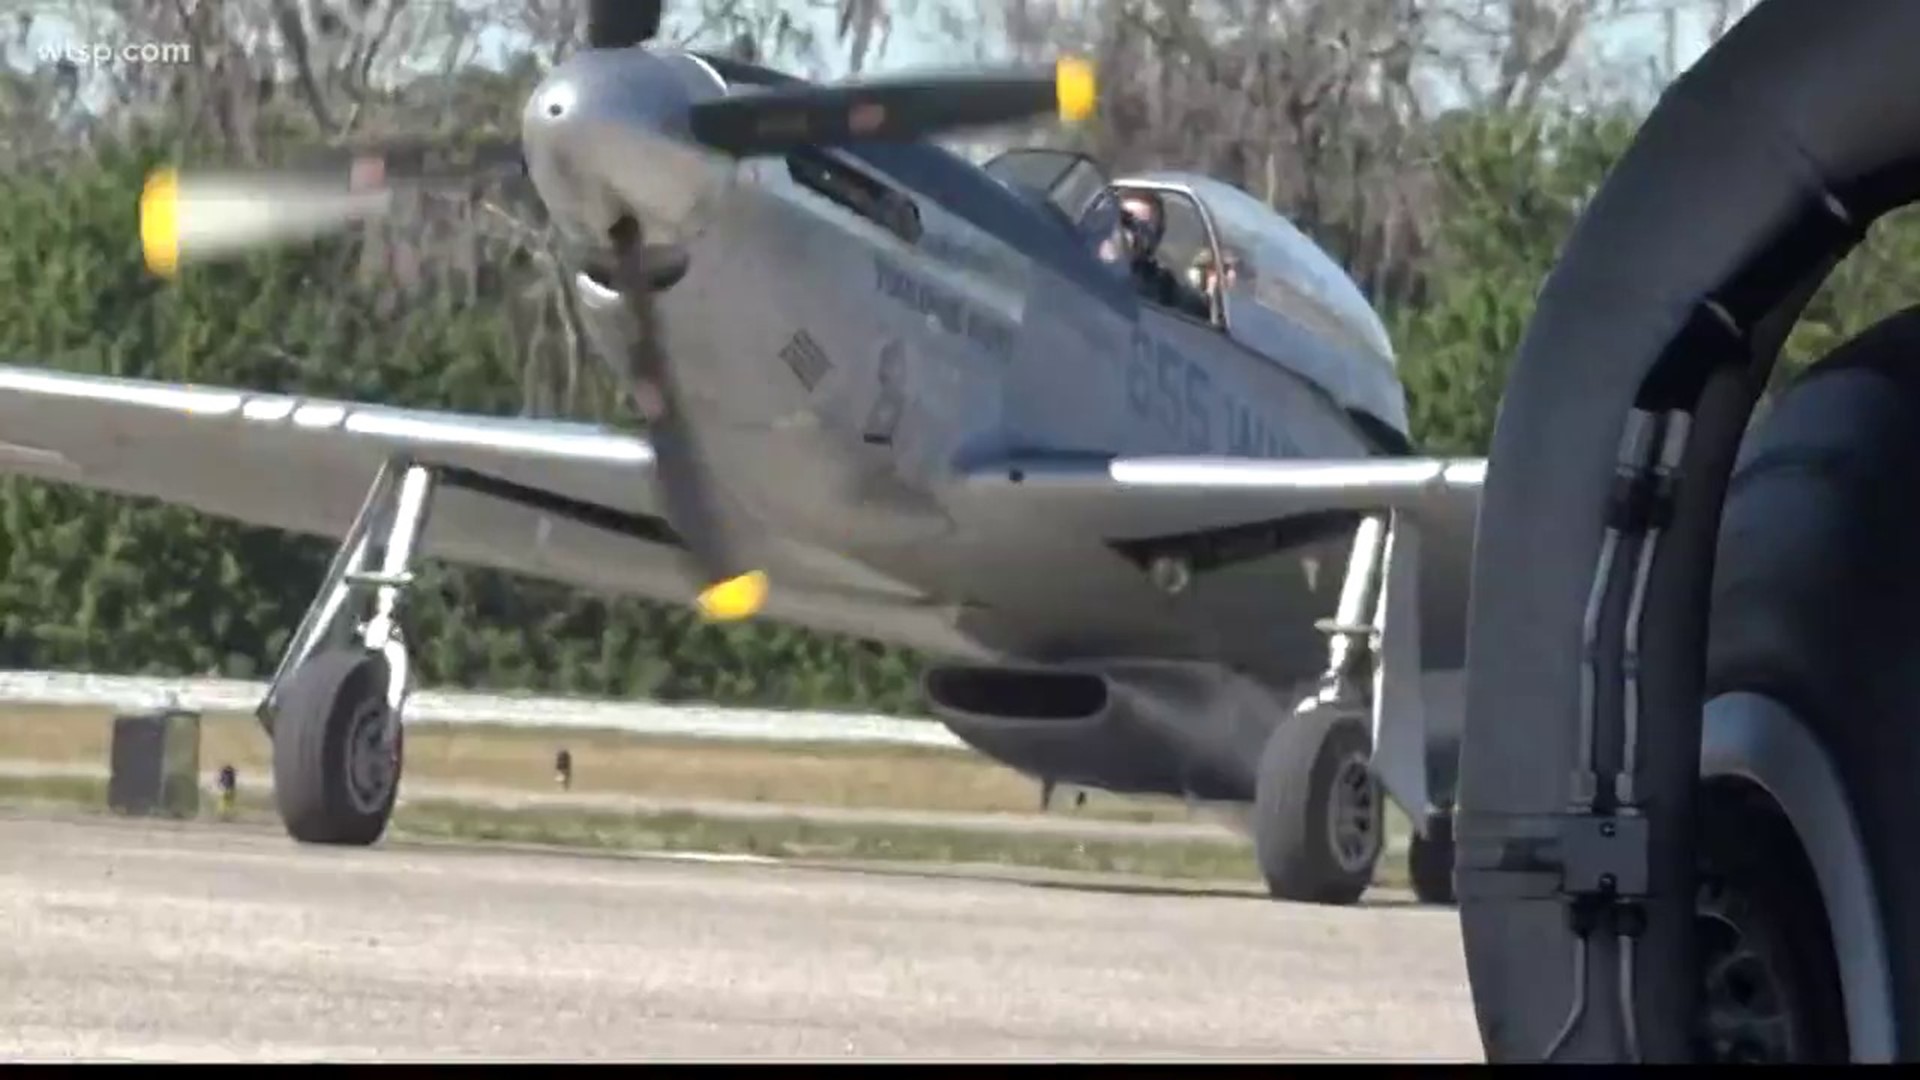 WWII pilot reunited with P-51 Mustang he flew in combat - WTSP